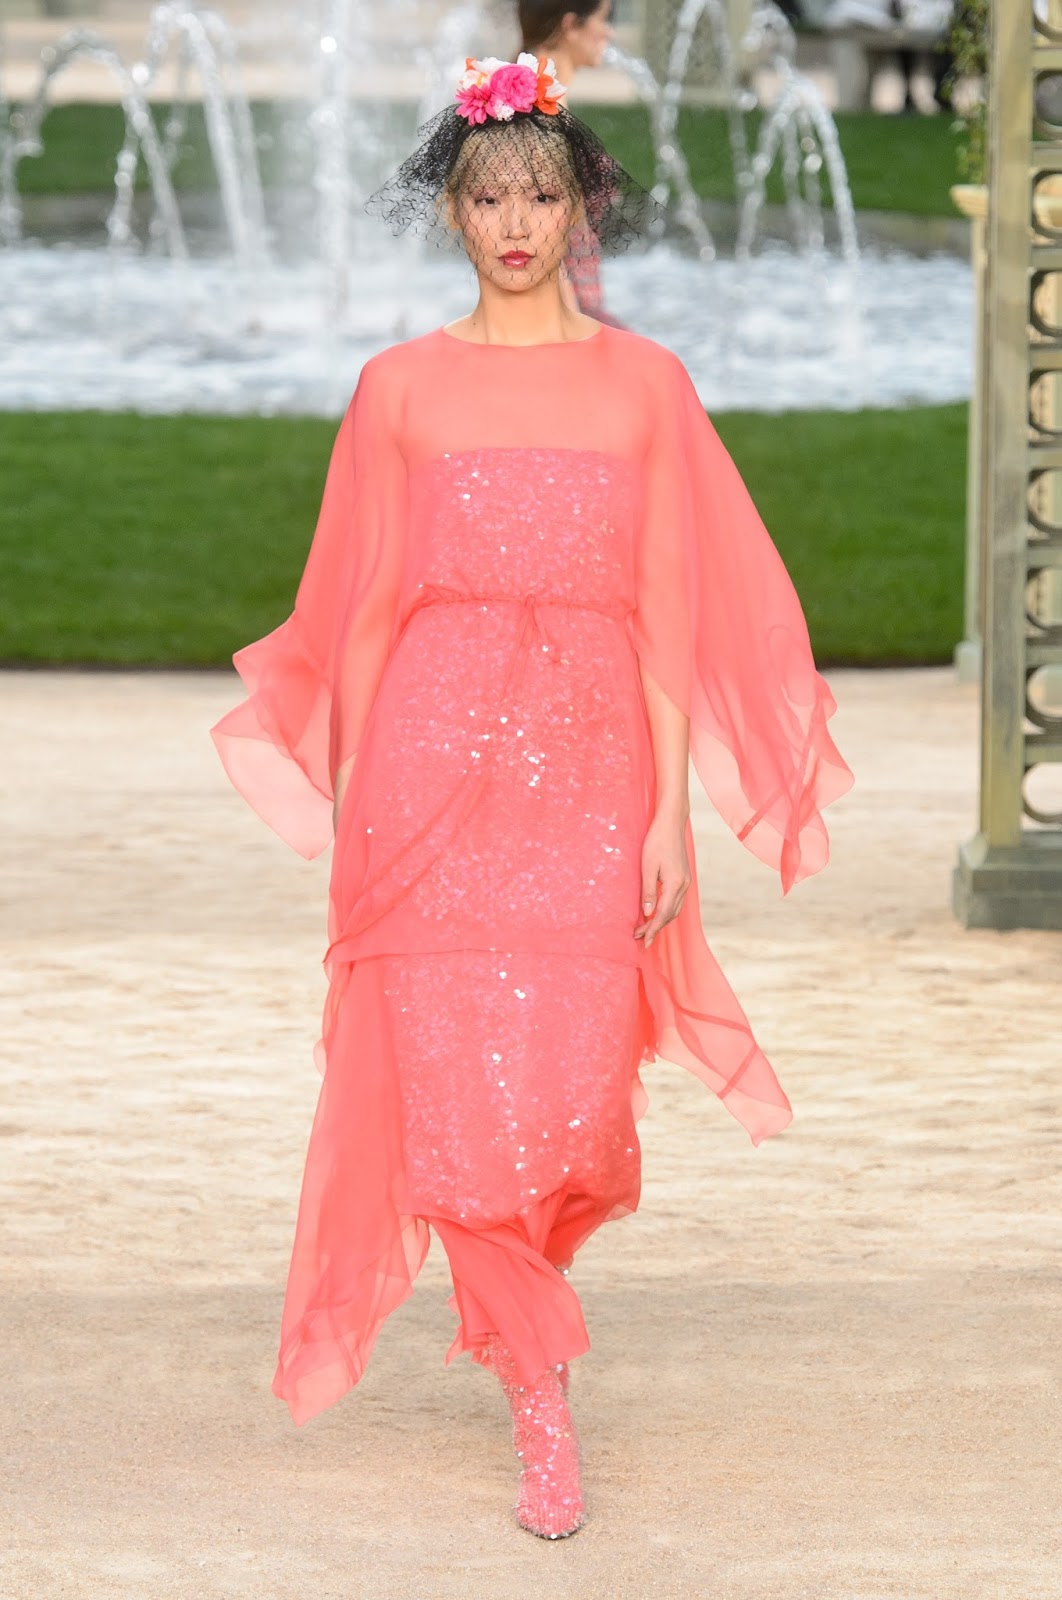 Chanel Couture: PART II January 26, 2018 | ZsaZsa Bellagio - Like No Other